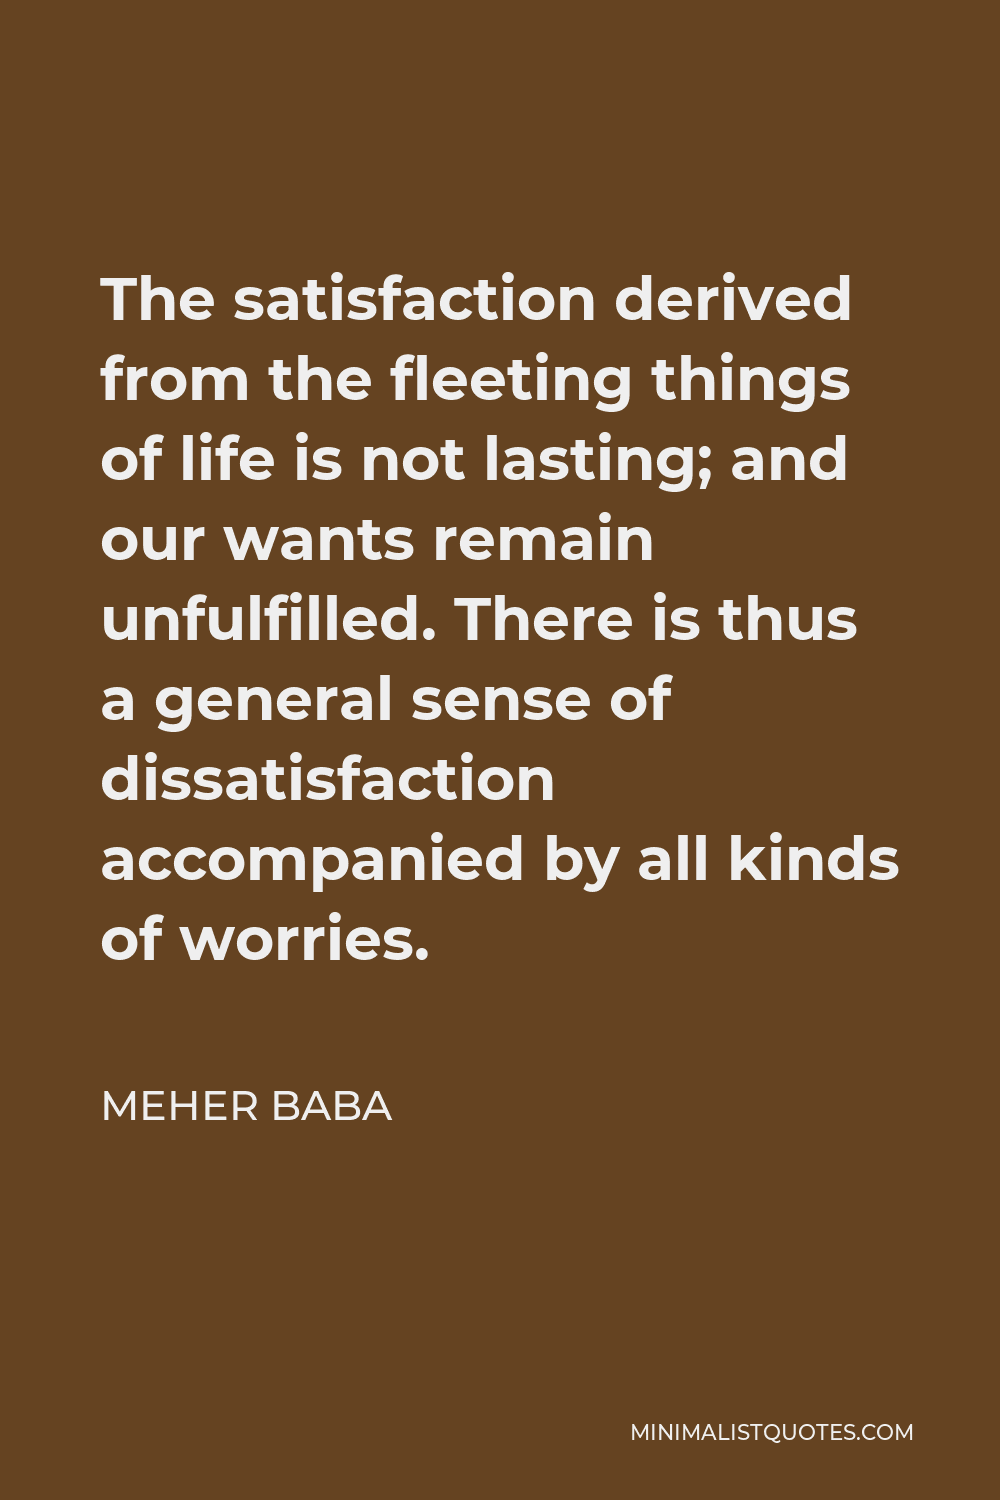 Meher Baba Quote - The satisfaction derived from the fleeting things of life is not lasting; and our wants remain unfulfilled. There is thus a general sense of dissatisfaction accompanied by all kinds of worries.